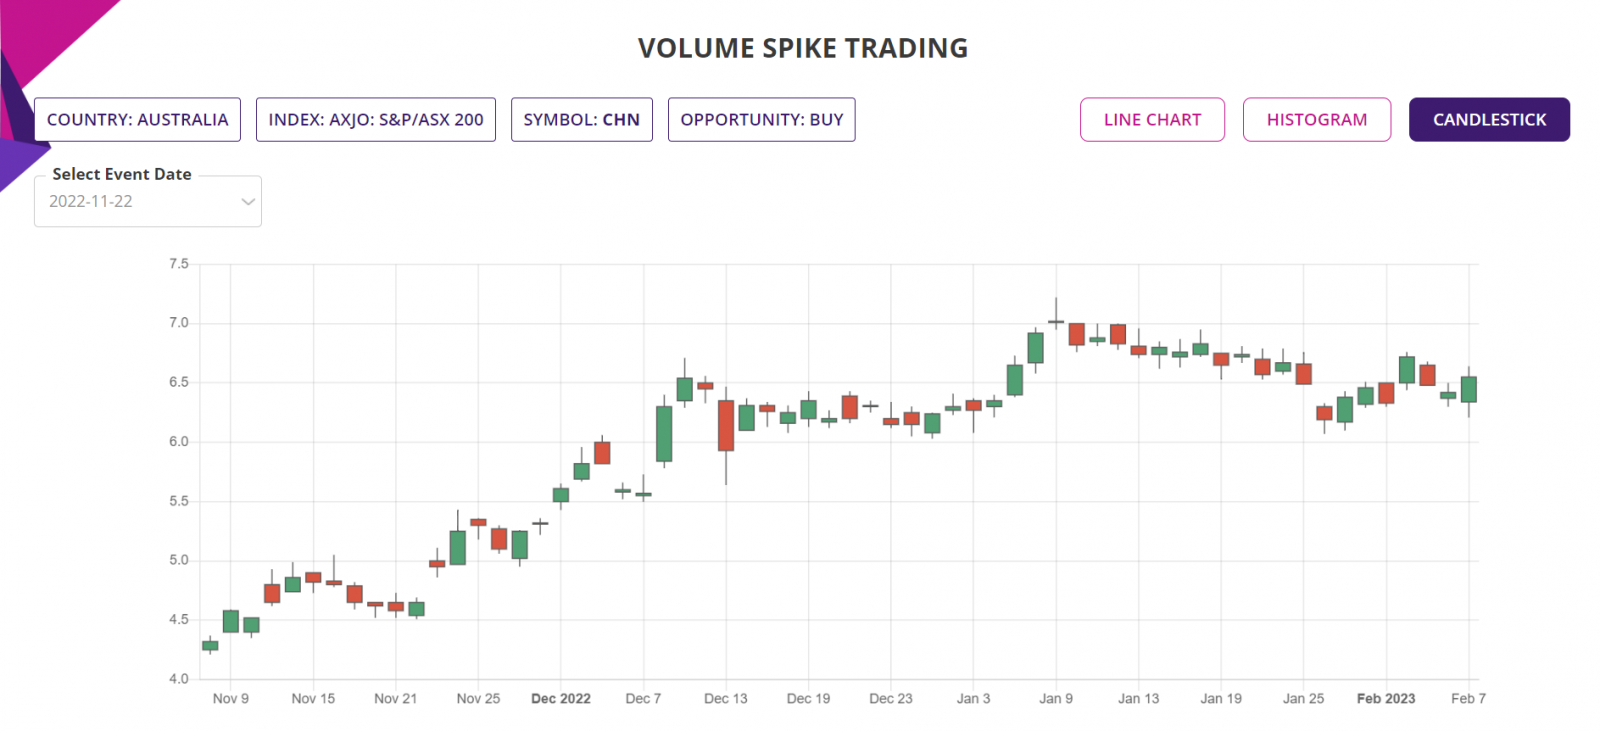 Volume spike trading strategy, detailed report, Candlestick chart, ASX200 stocks